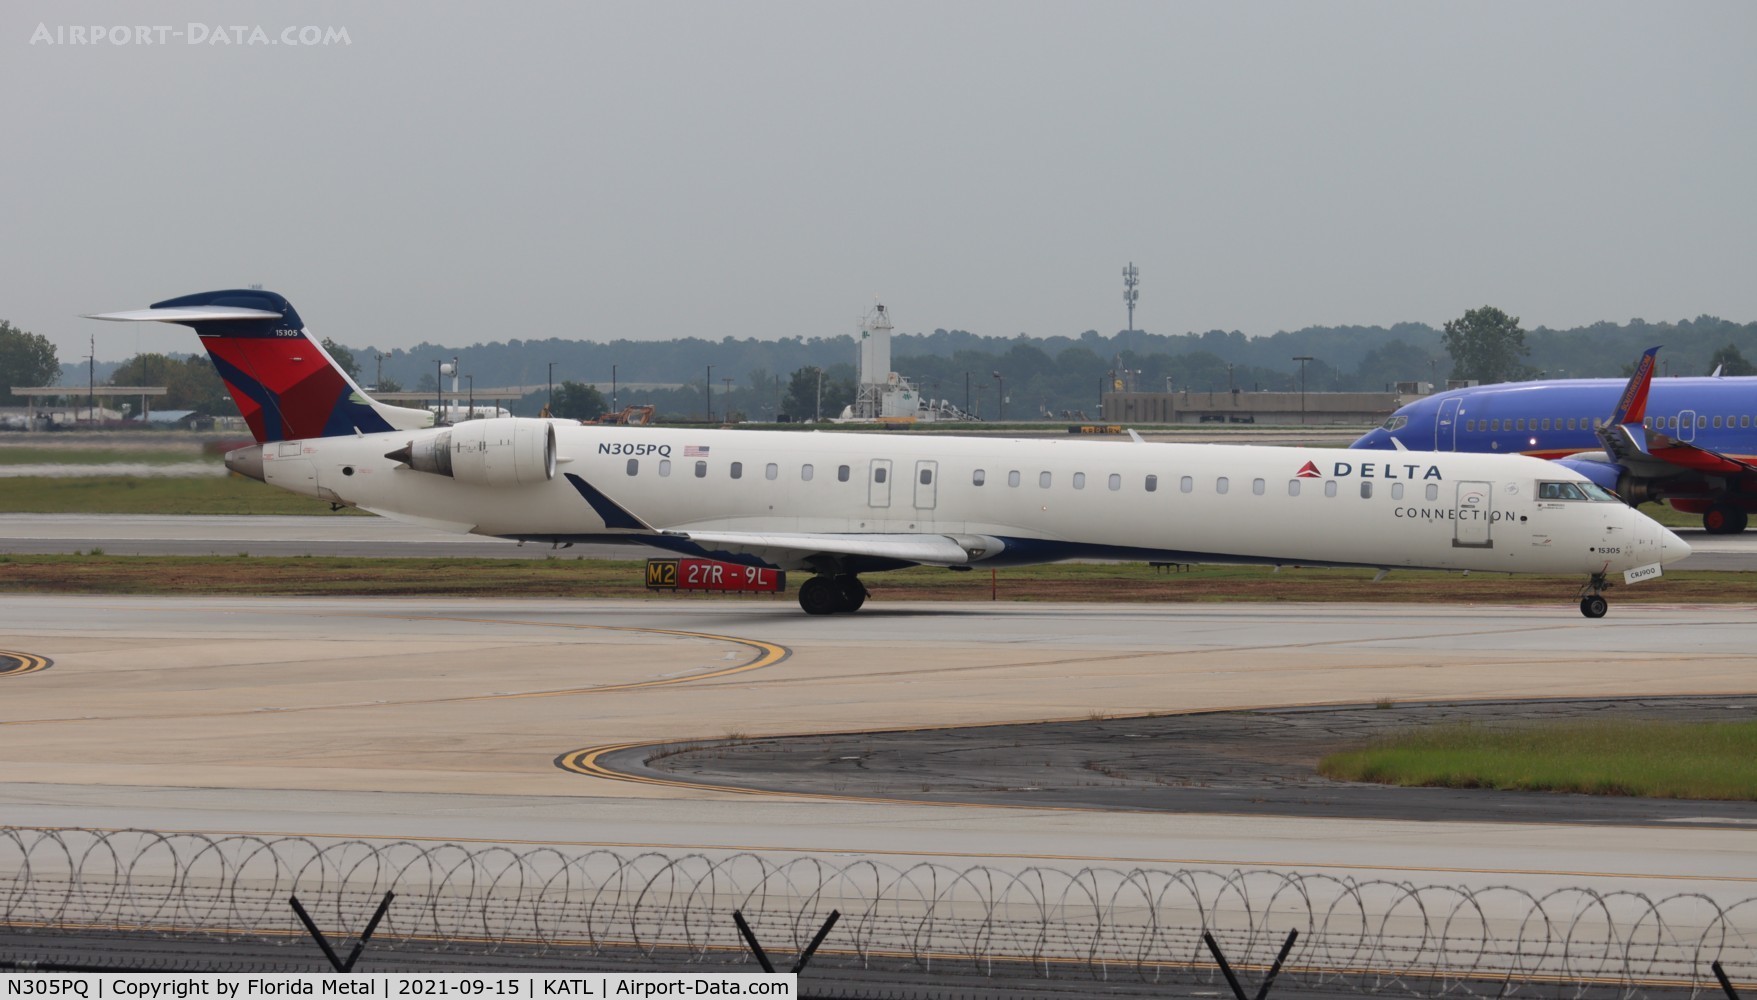 N305PQ, 2014 Bombardier CRJ-900LR (CL-600-2D24) C/N 15305, END/DAL CR9 zx ATL south side